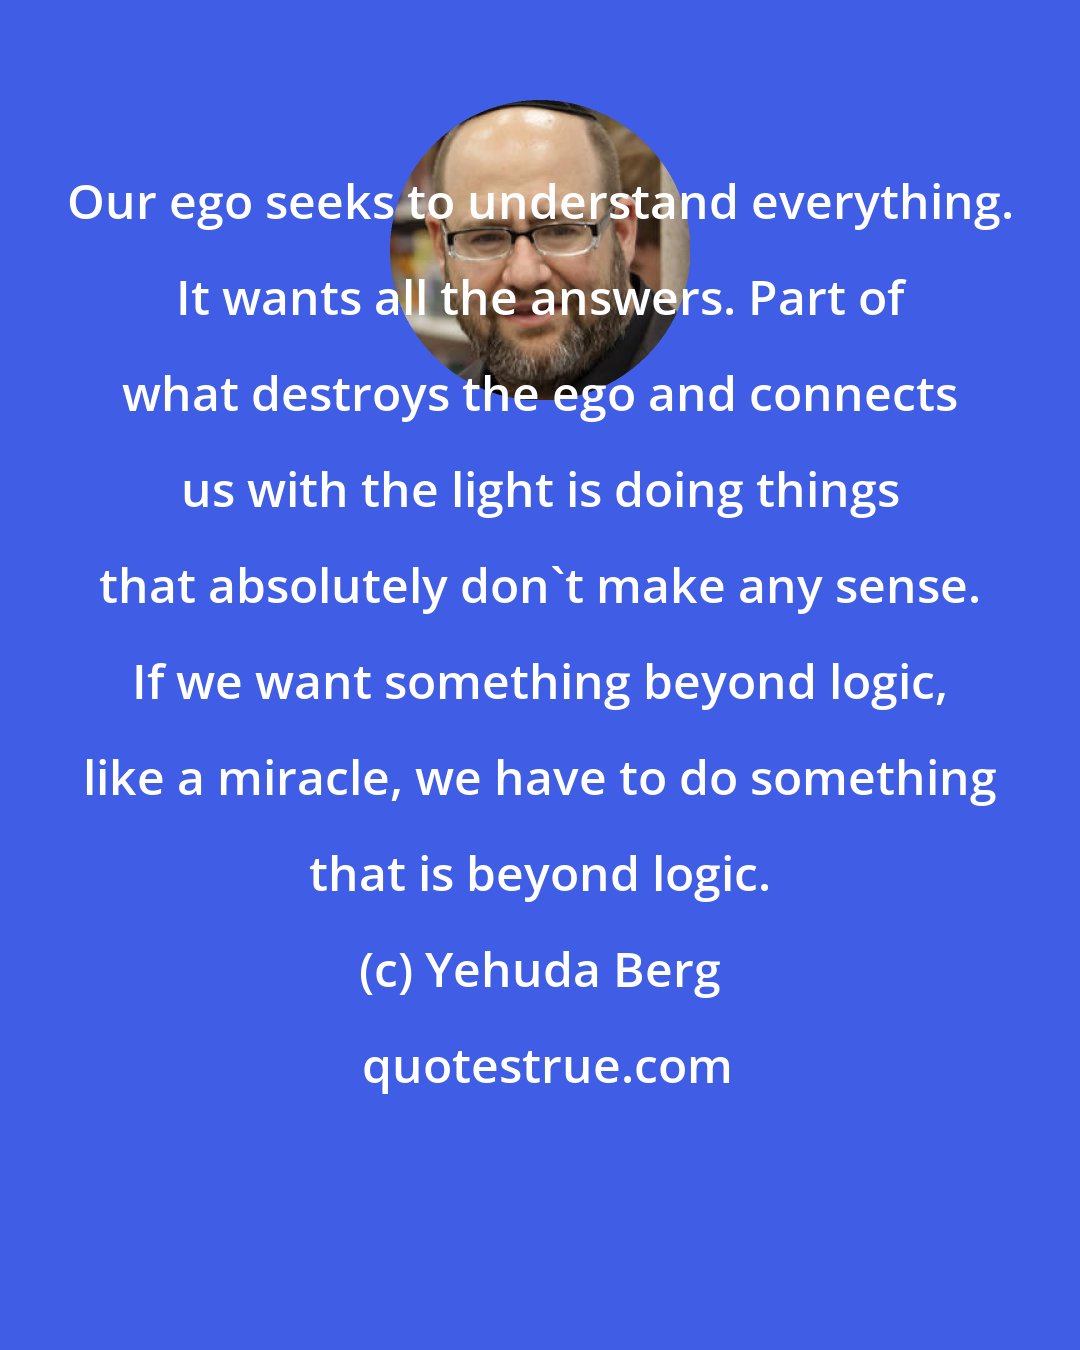 Yehuda Berg: Our ego seeks to understand everything. It wants all the answers. Part of what destroys the ego and connects us with the light is doing things that absolutely don't make any sense. If we want something beyond logic, like a miracle, we have to do something that is beyond logic.